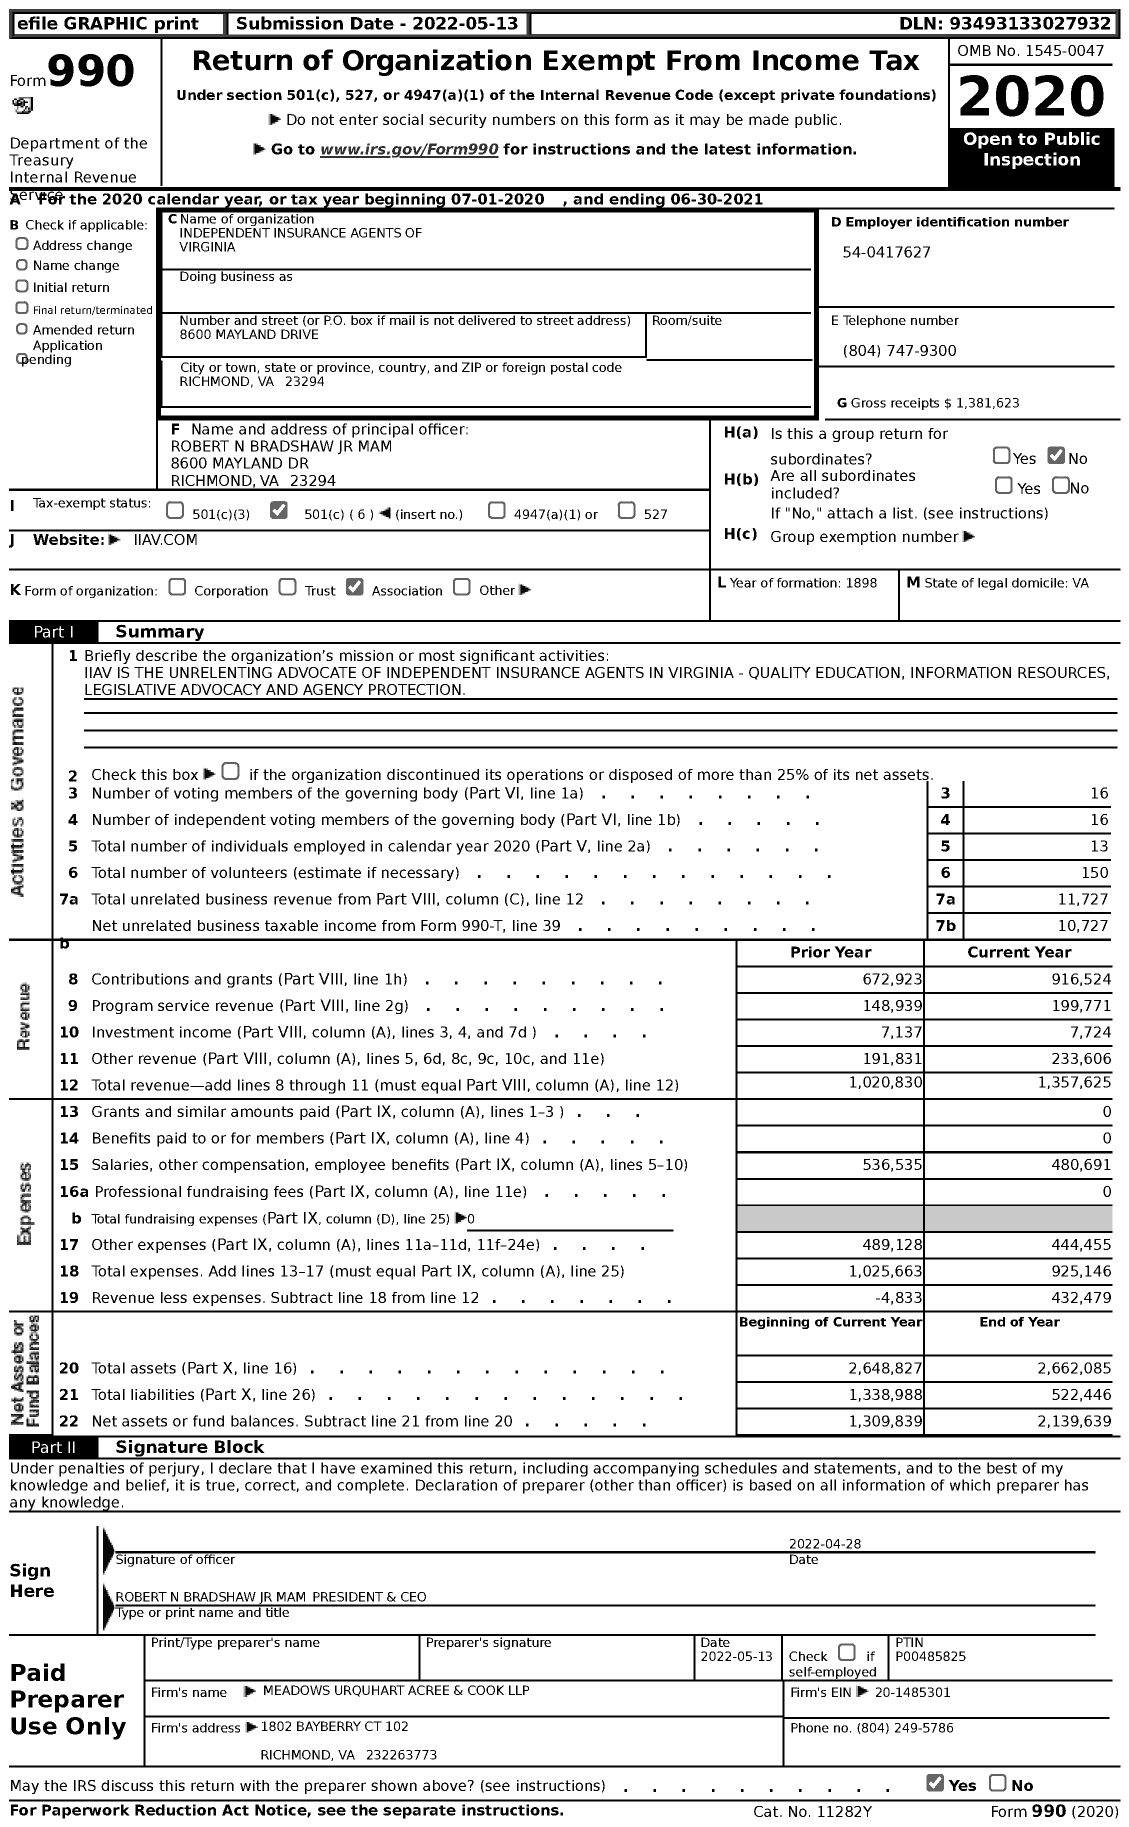 Image of first page of 2020 Form 990 for Independent Insurance Agents of Virginia (IIAV)